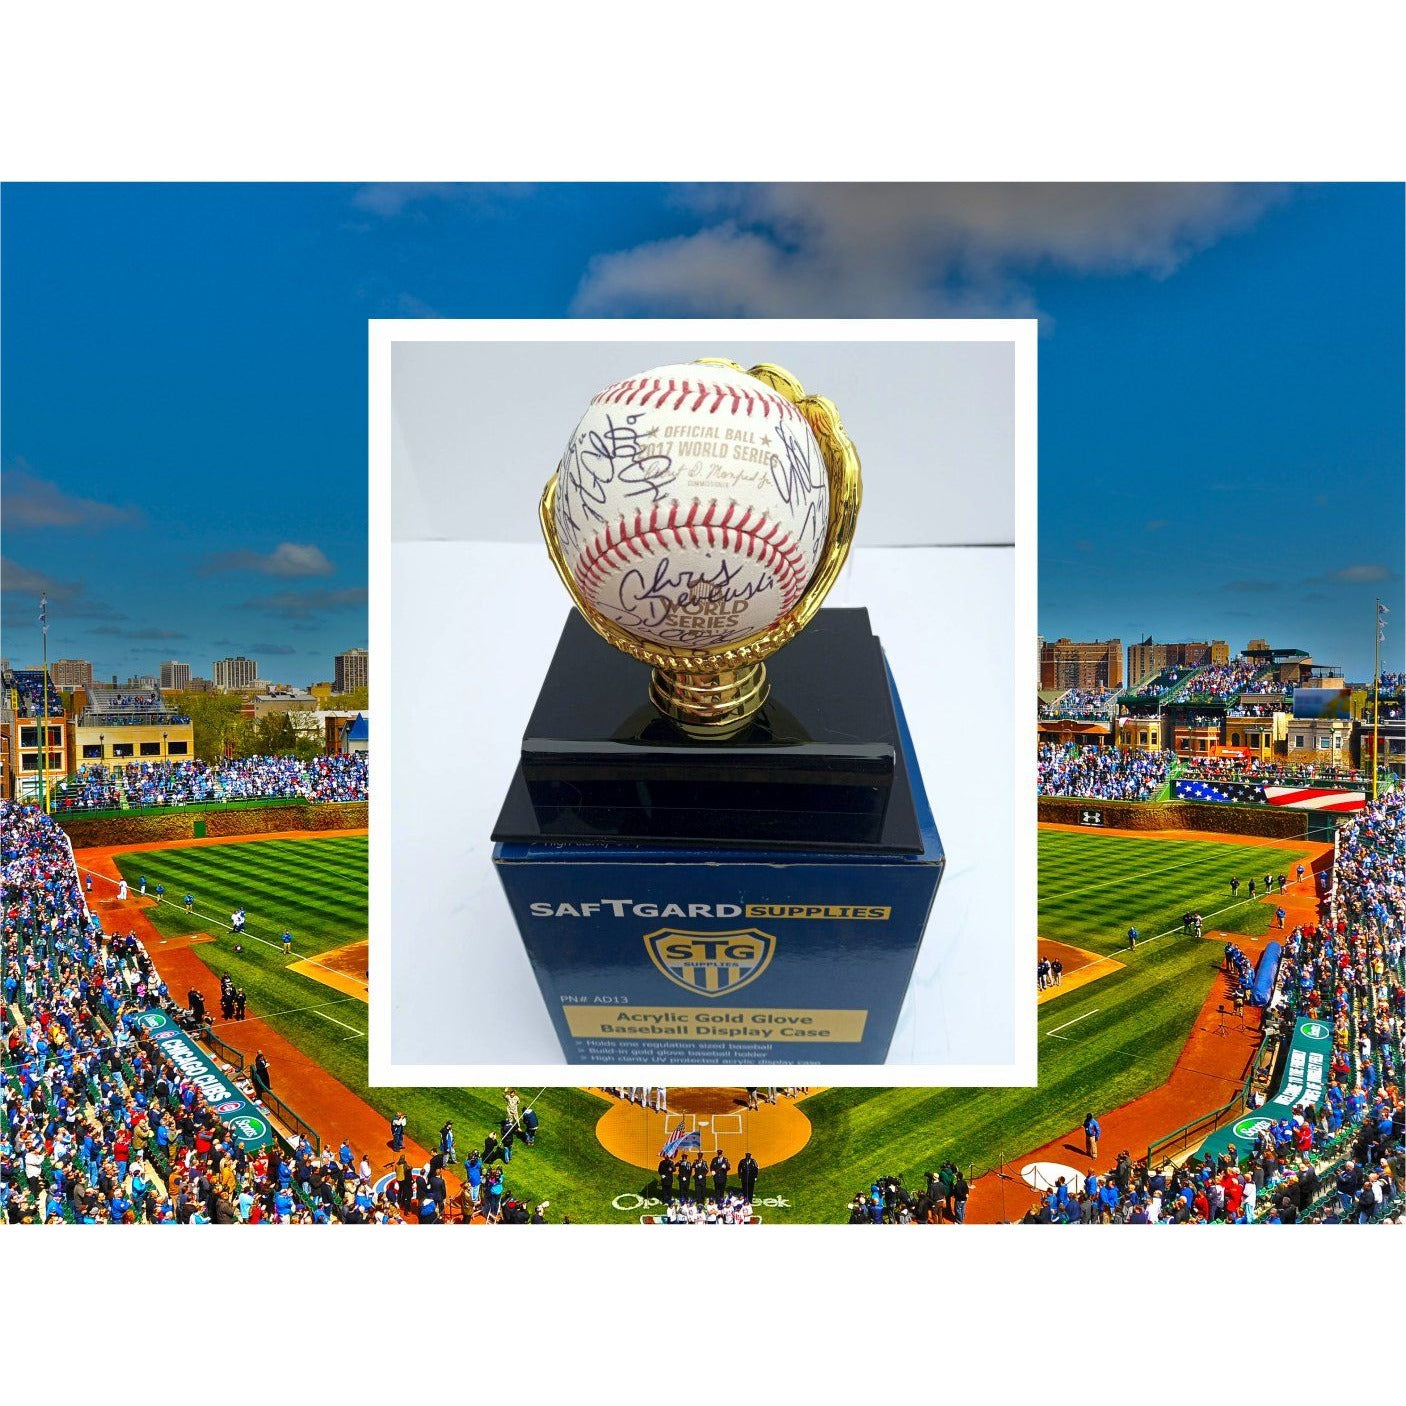 2017 Houston Astros world champions World Series baseball team signed with proof with free case